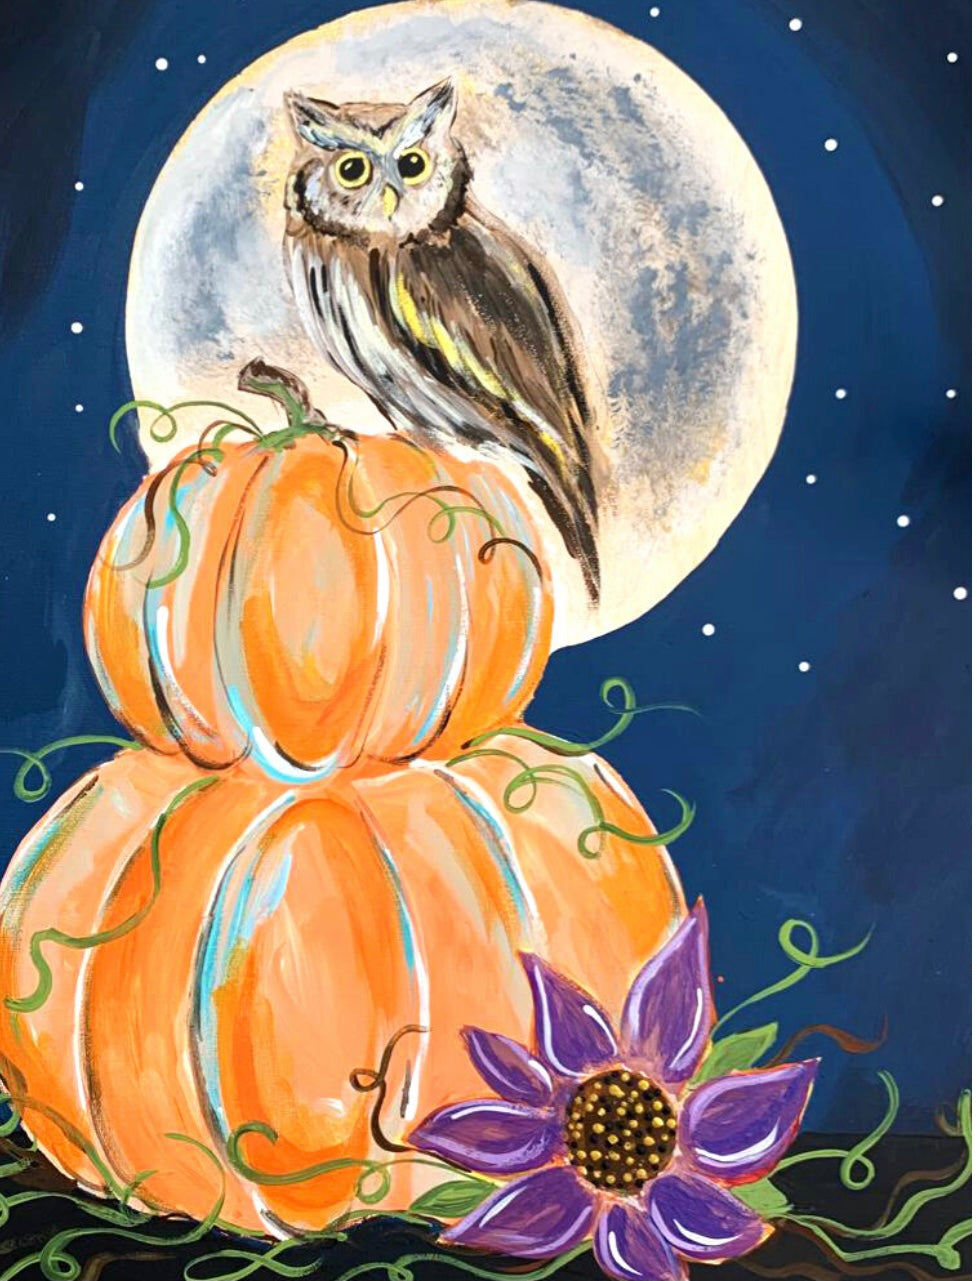 Hootiful Harvest - Art Bayou Paint Party schedule your fun today!